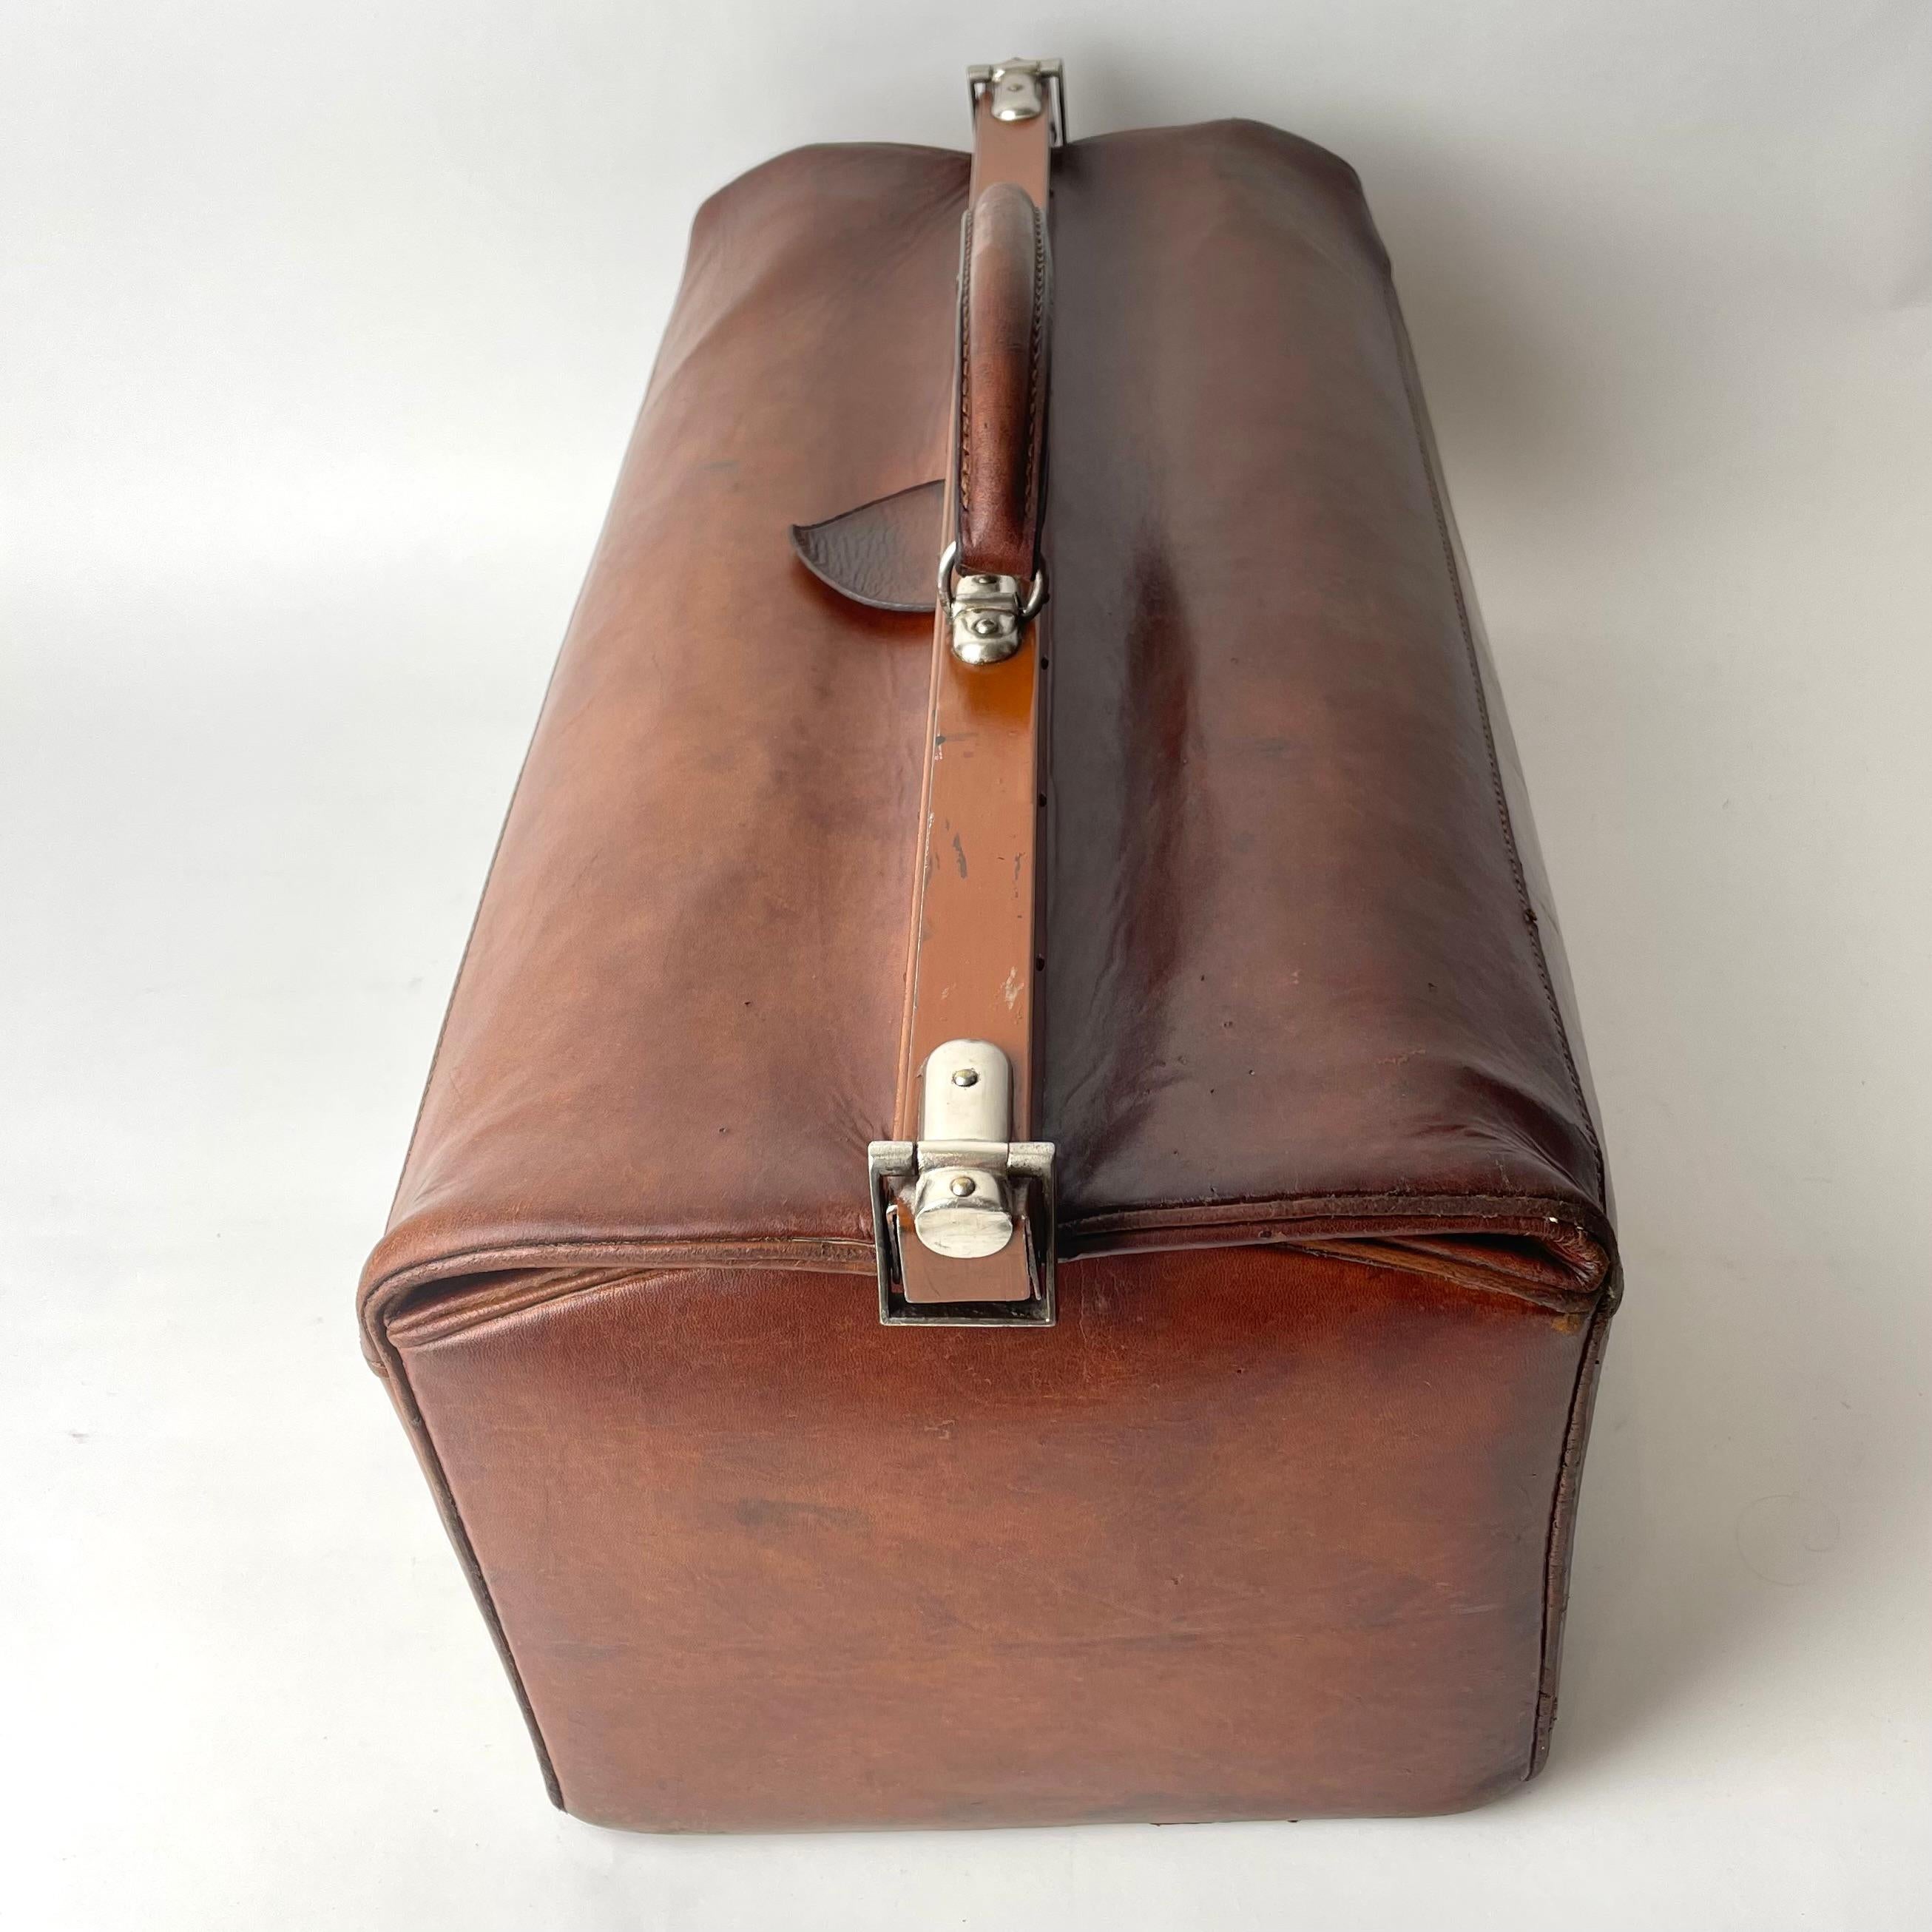 Early 19th Century Leather Luggage with Nickel Details In Good Condition For Sale In Knivsta, SE